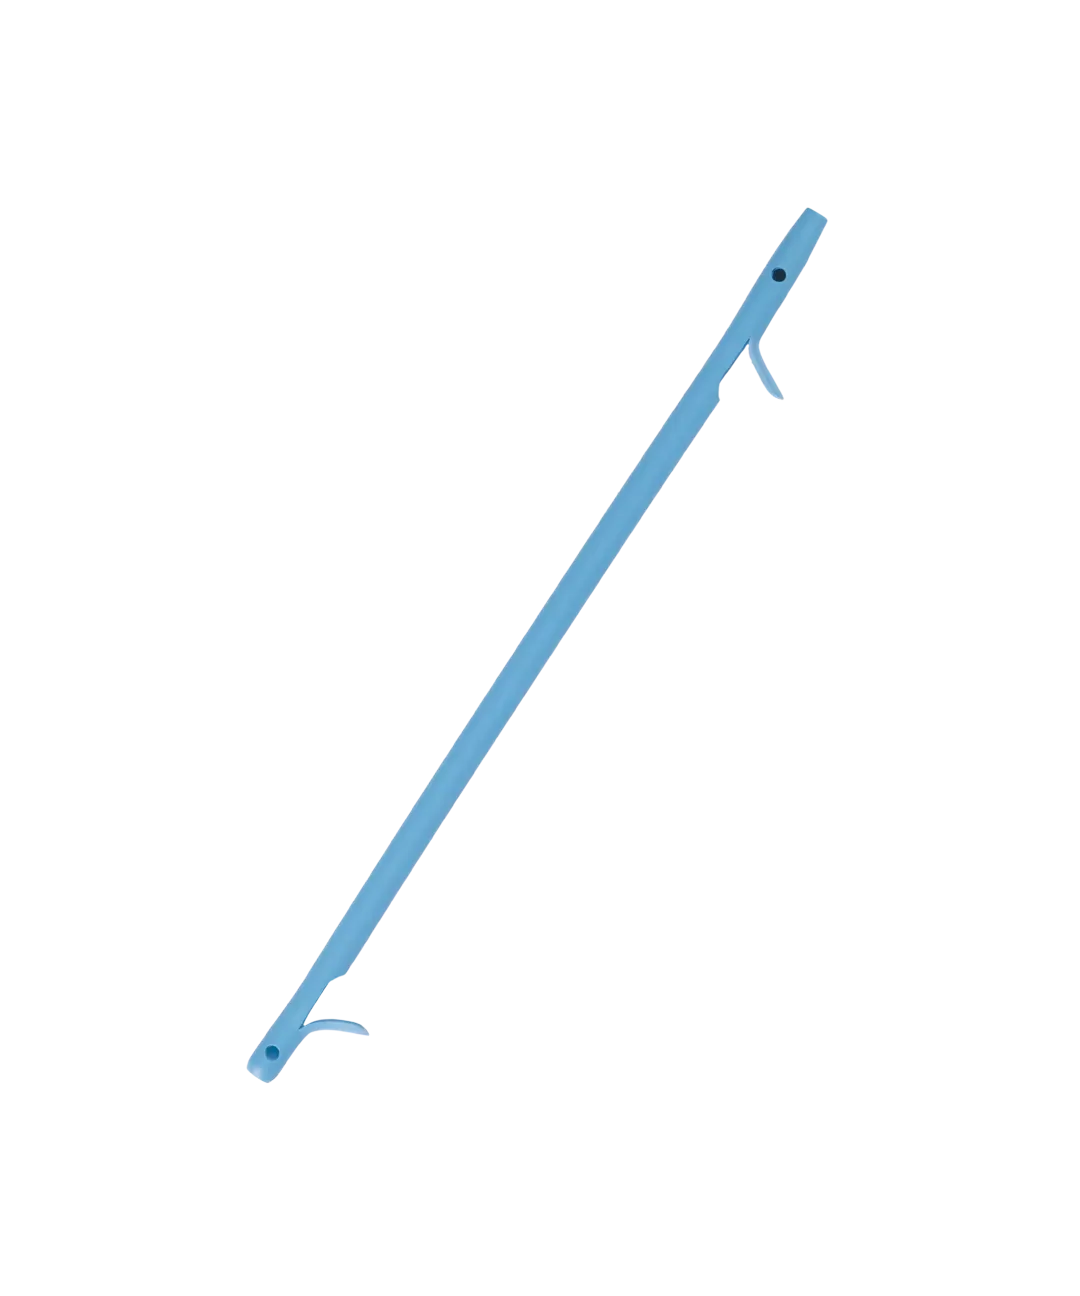 Biliary Drainage Catheter With Introducer System Straight